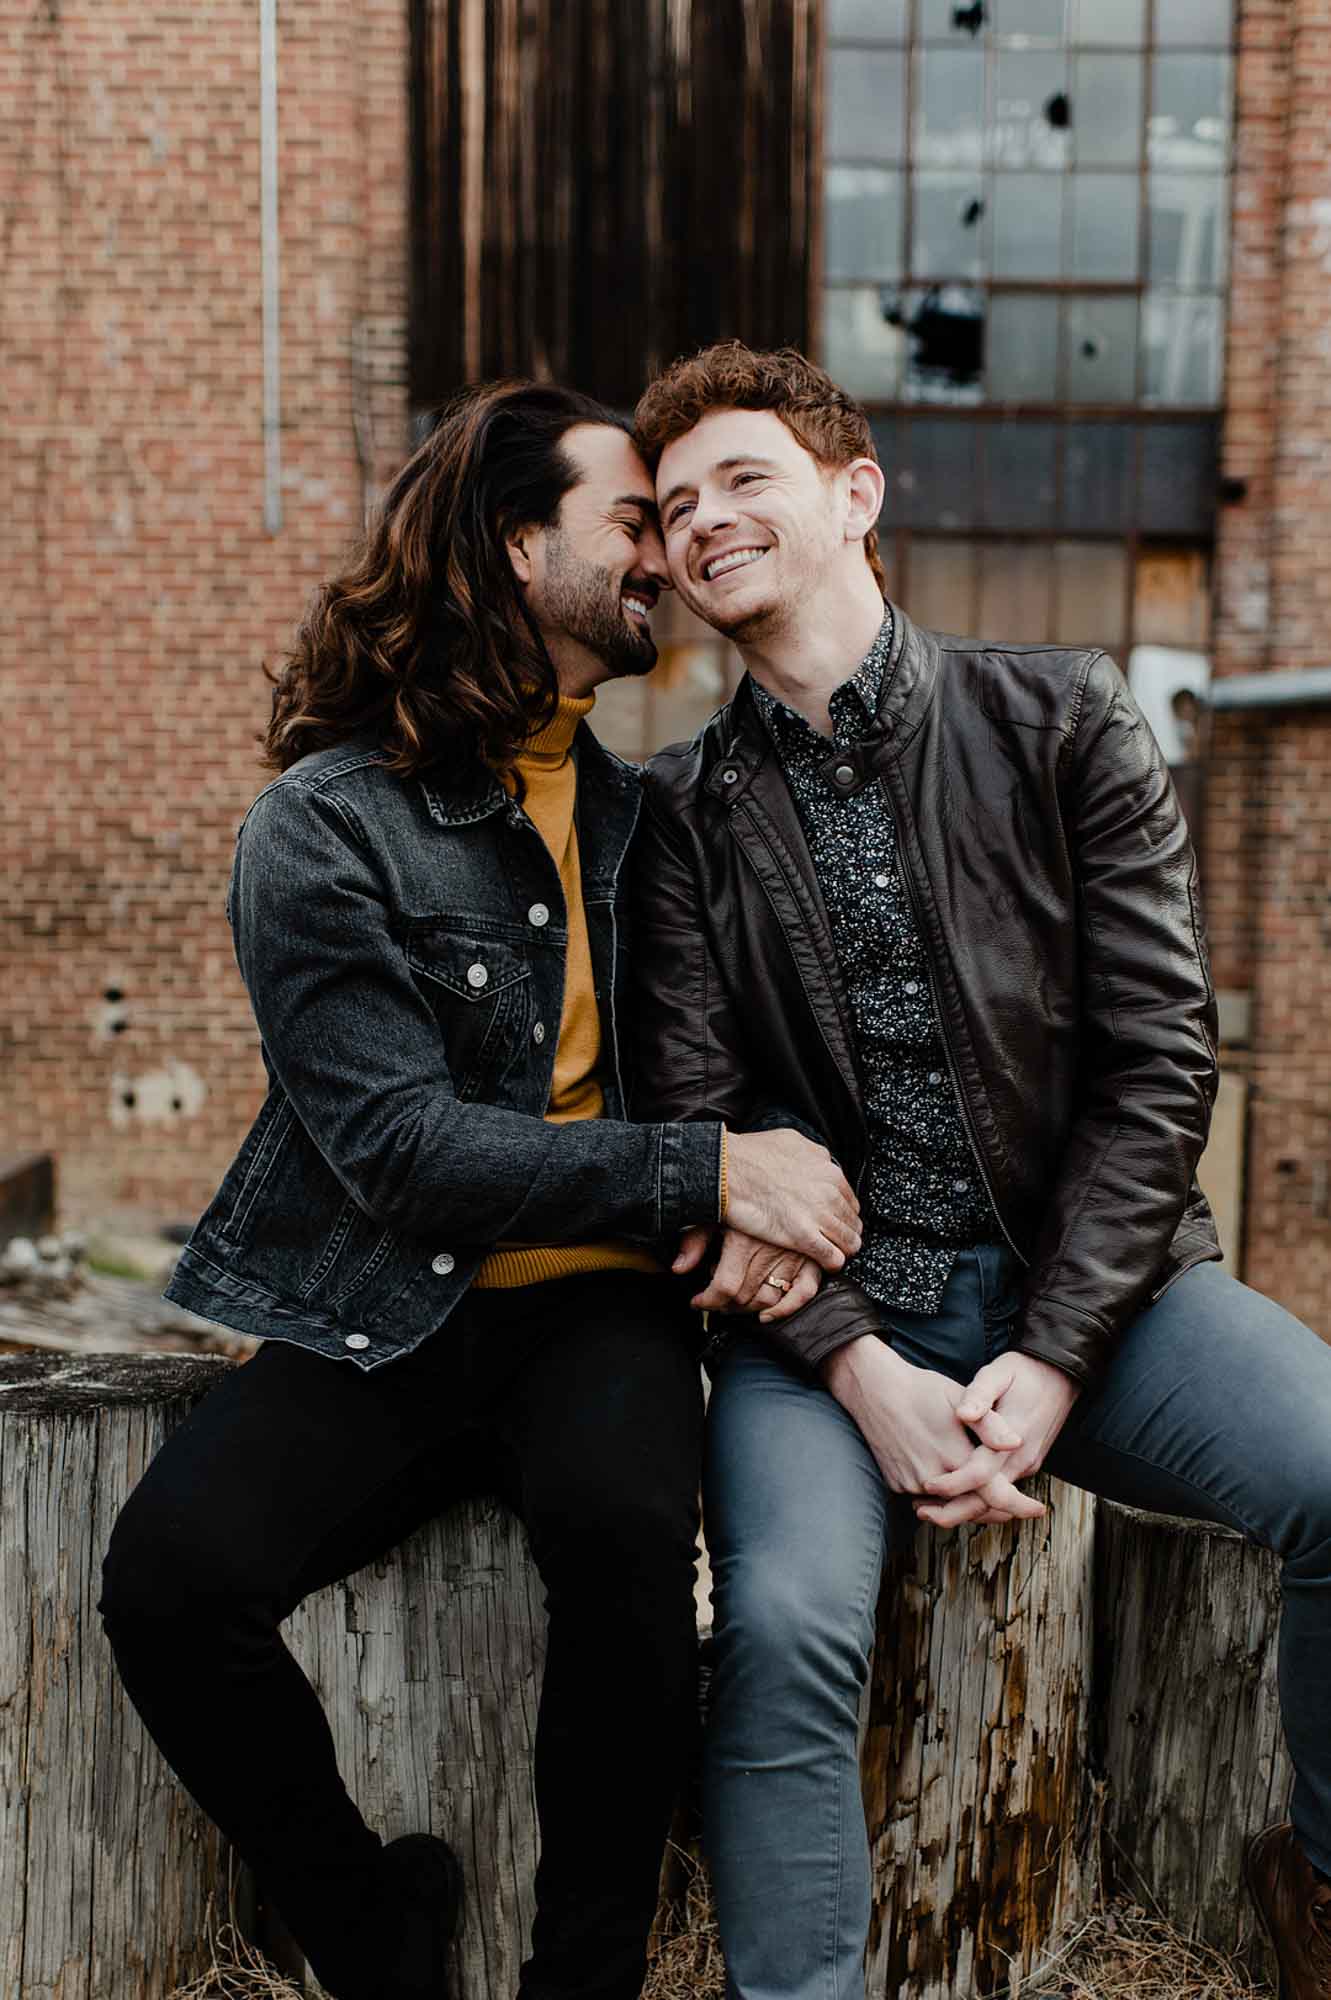 Heartwarming Maryland engagement session filled with love and laughter | Wild June Photography | Featured on Equally Wed, the leading LGBTQ+ wedding magazine